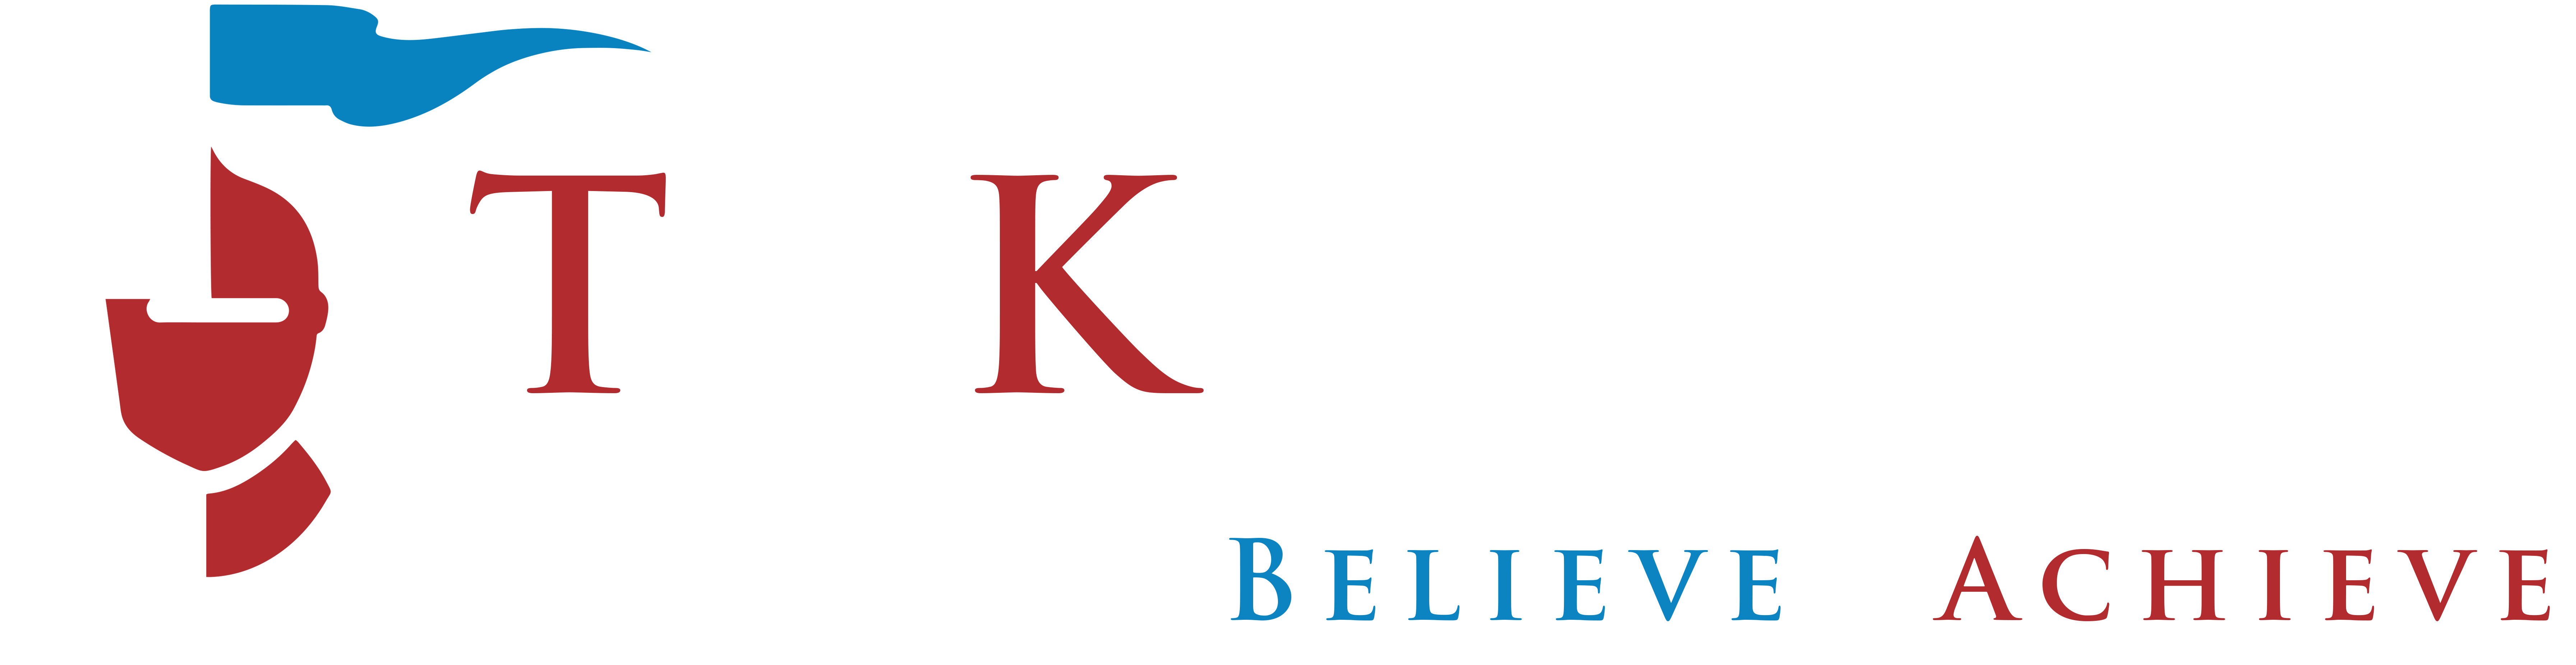 The Knights pvt